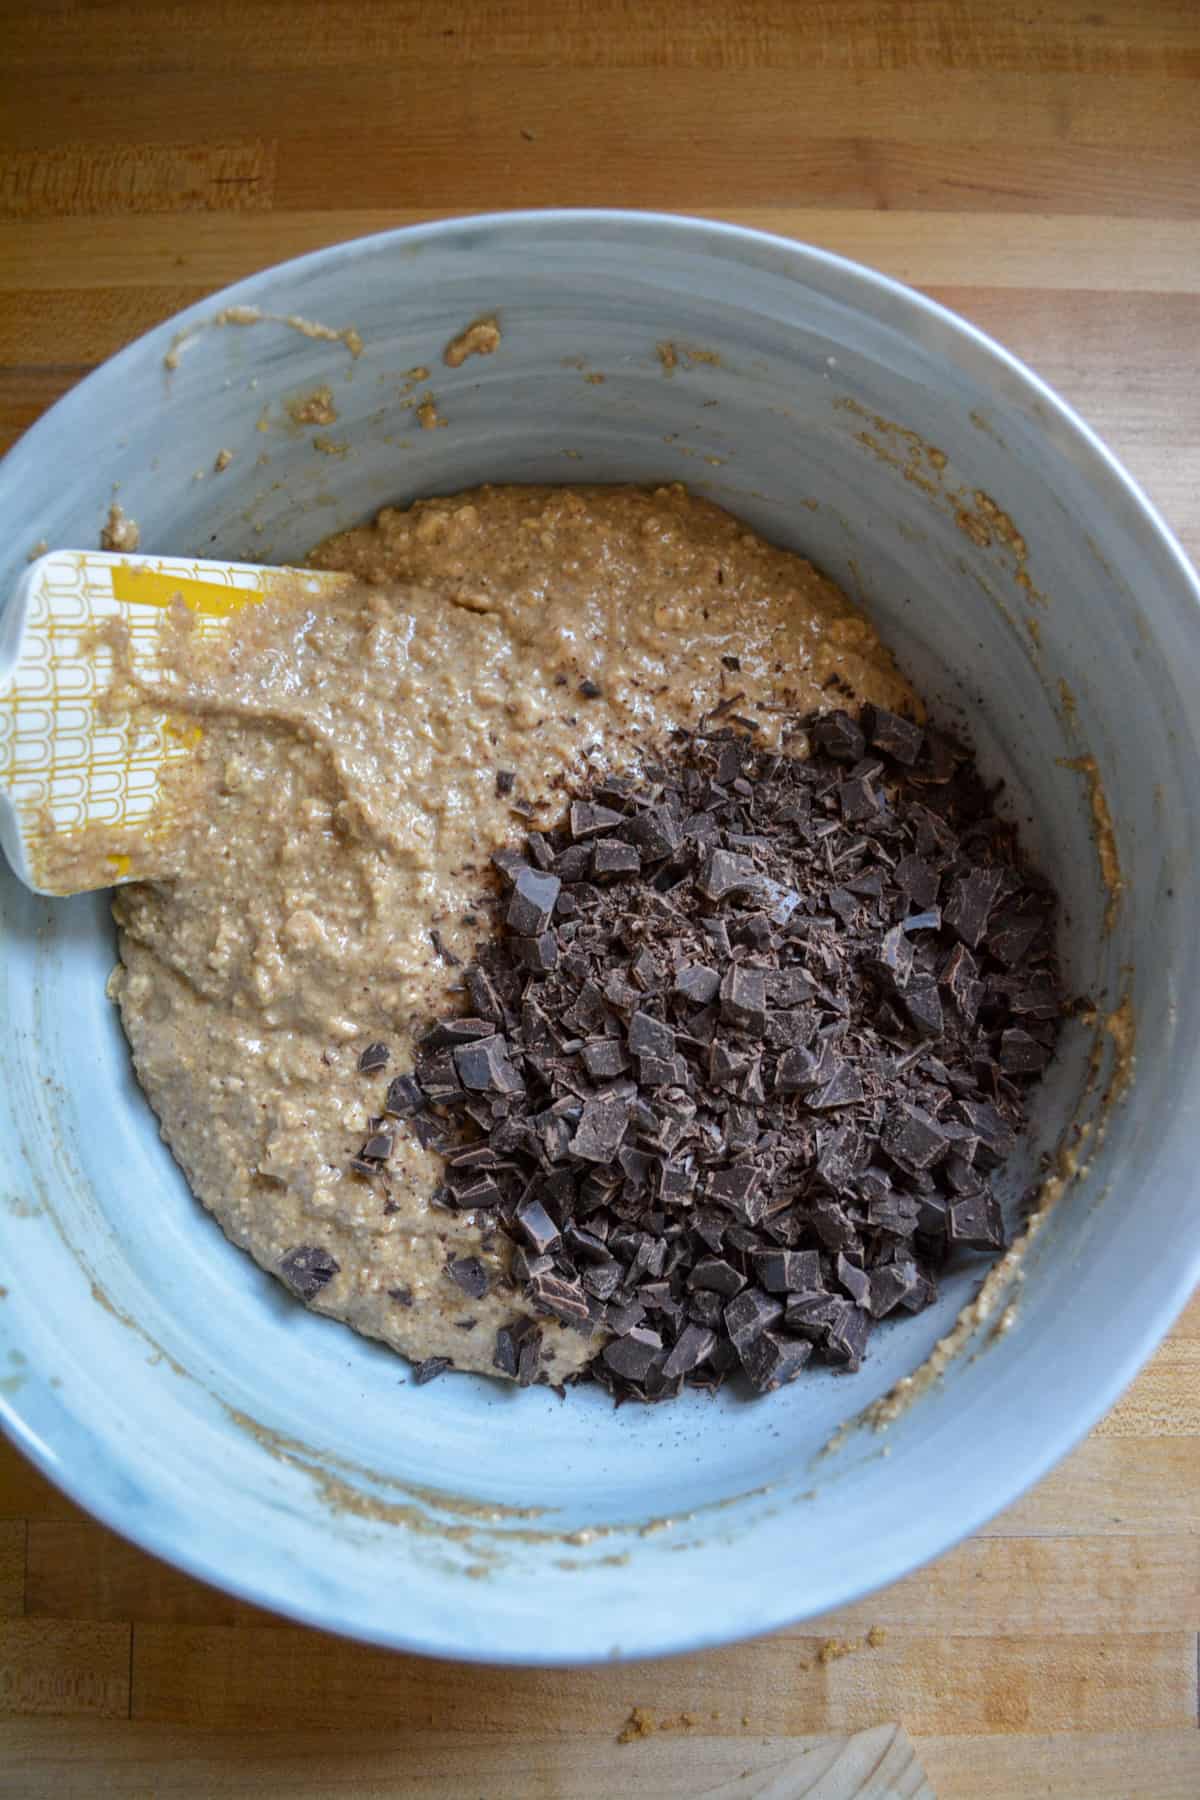 Chocolate Chips added into the batter.